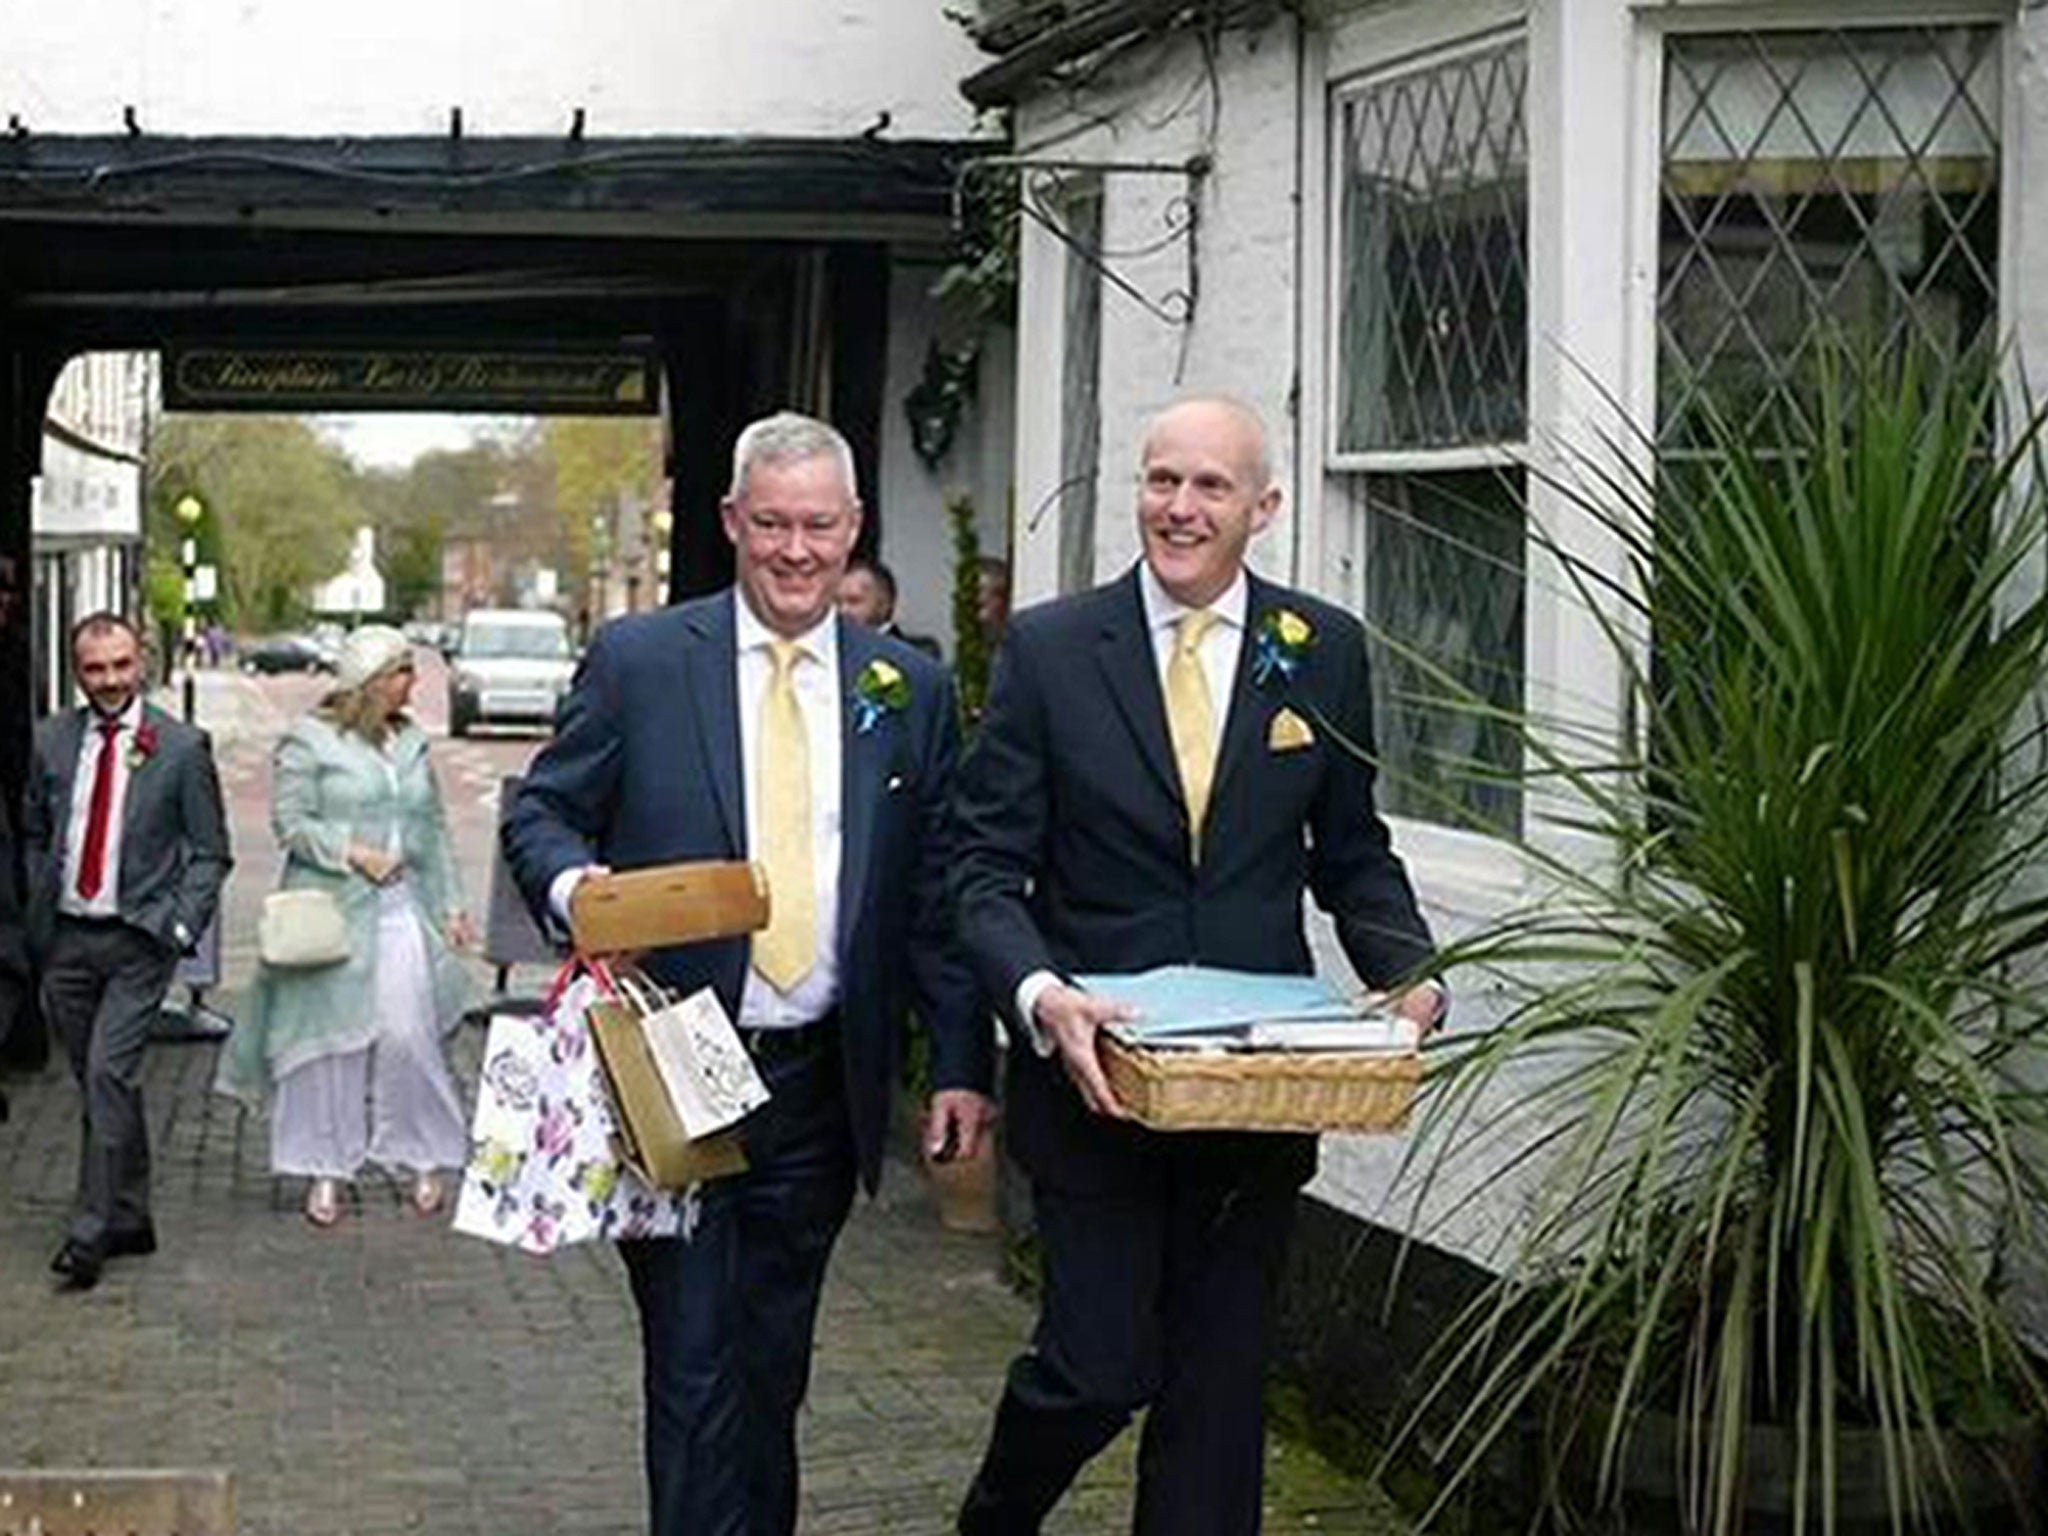 Canon Jeremy Pemberton, left, with Laurence Cunnington, right, after their marriage in April 2014